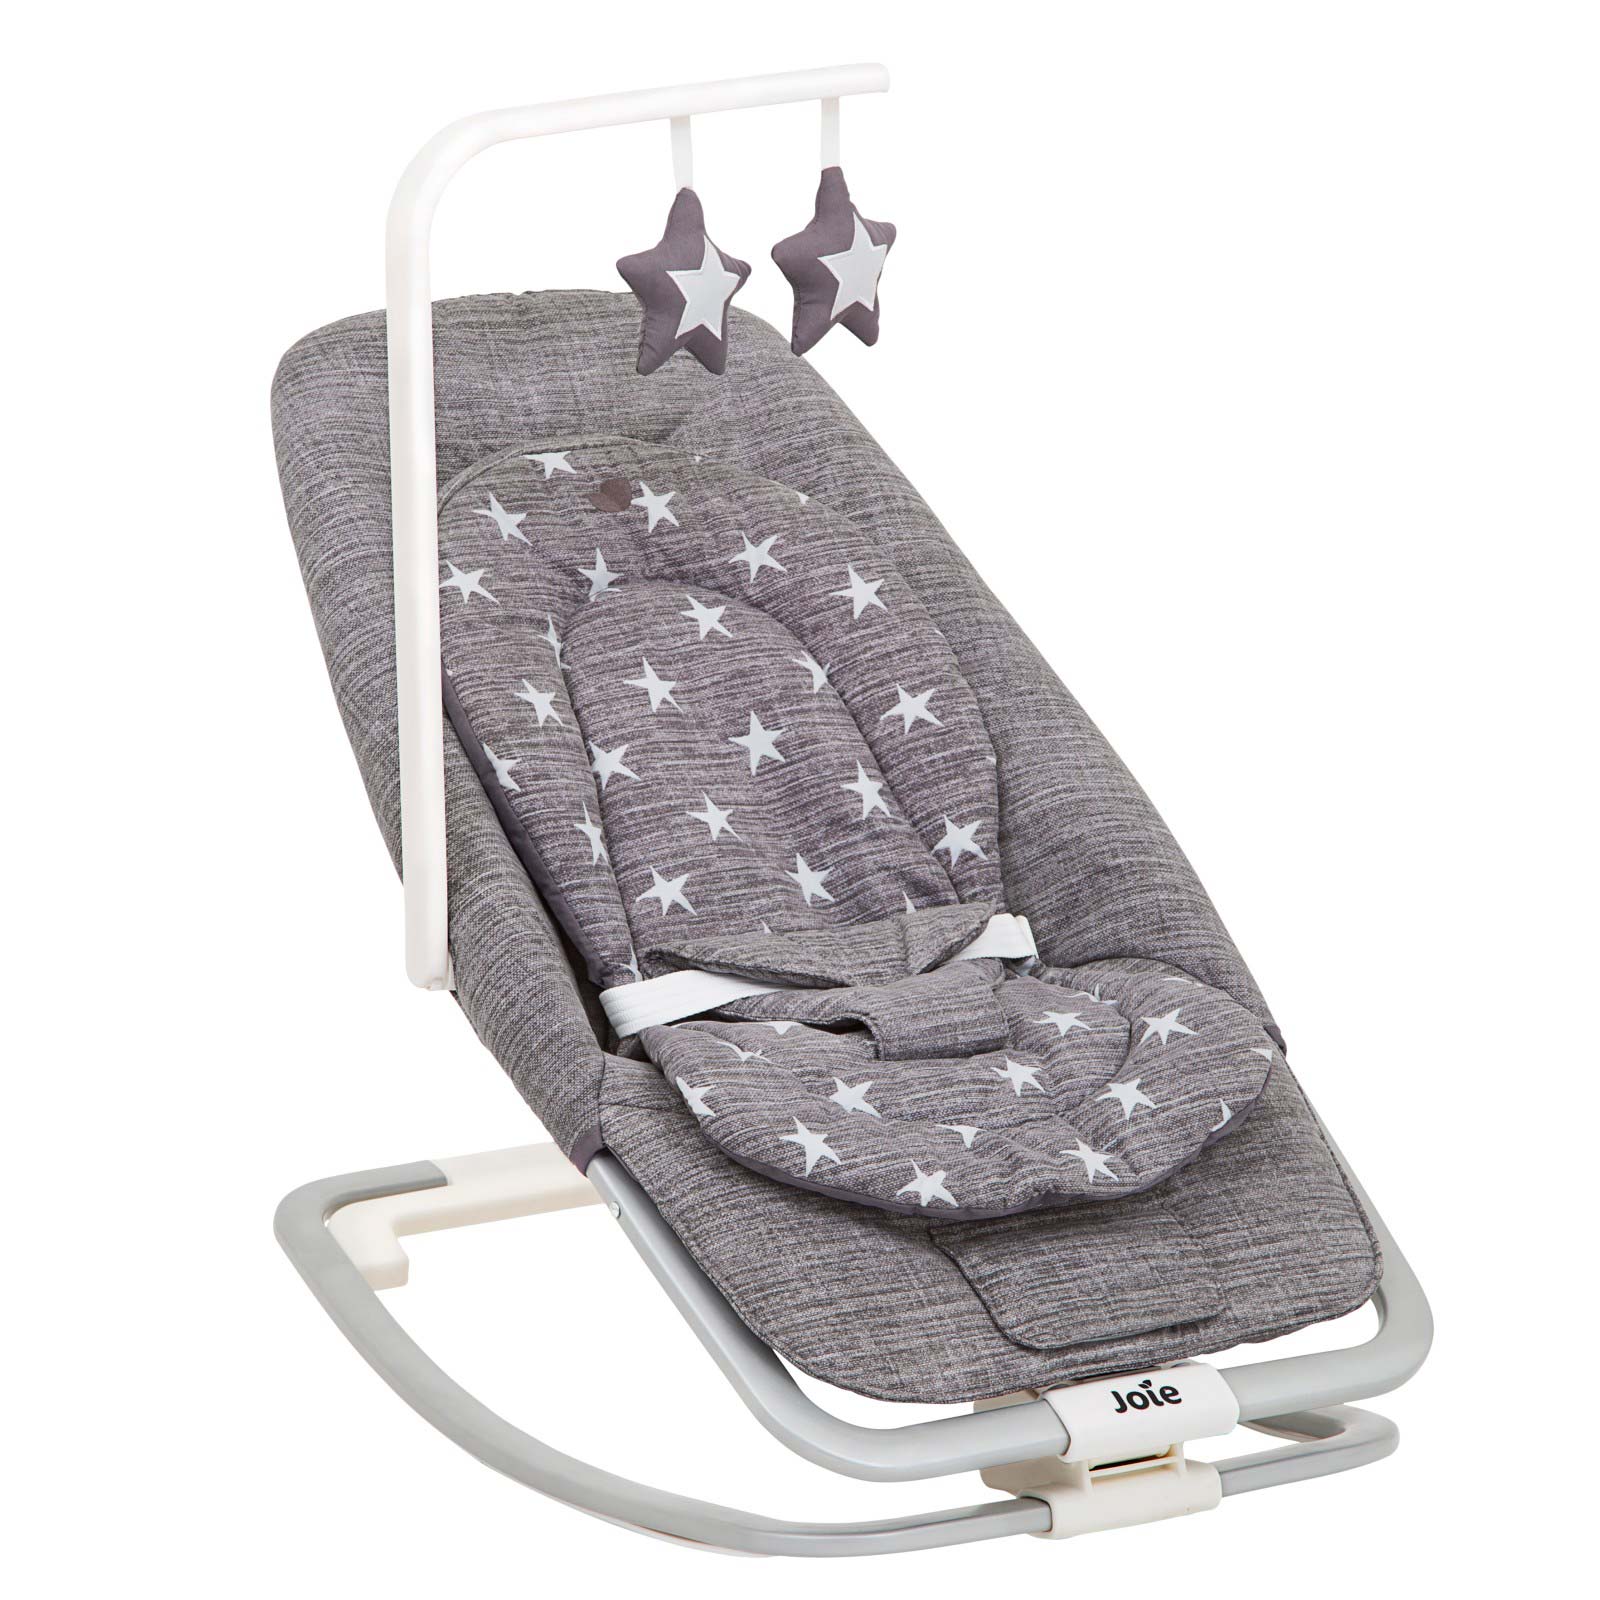 joie dreamer baby bouncer review